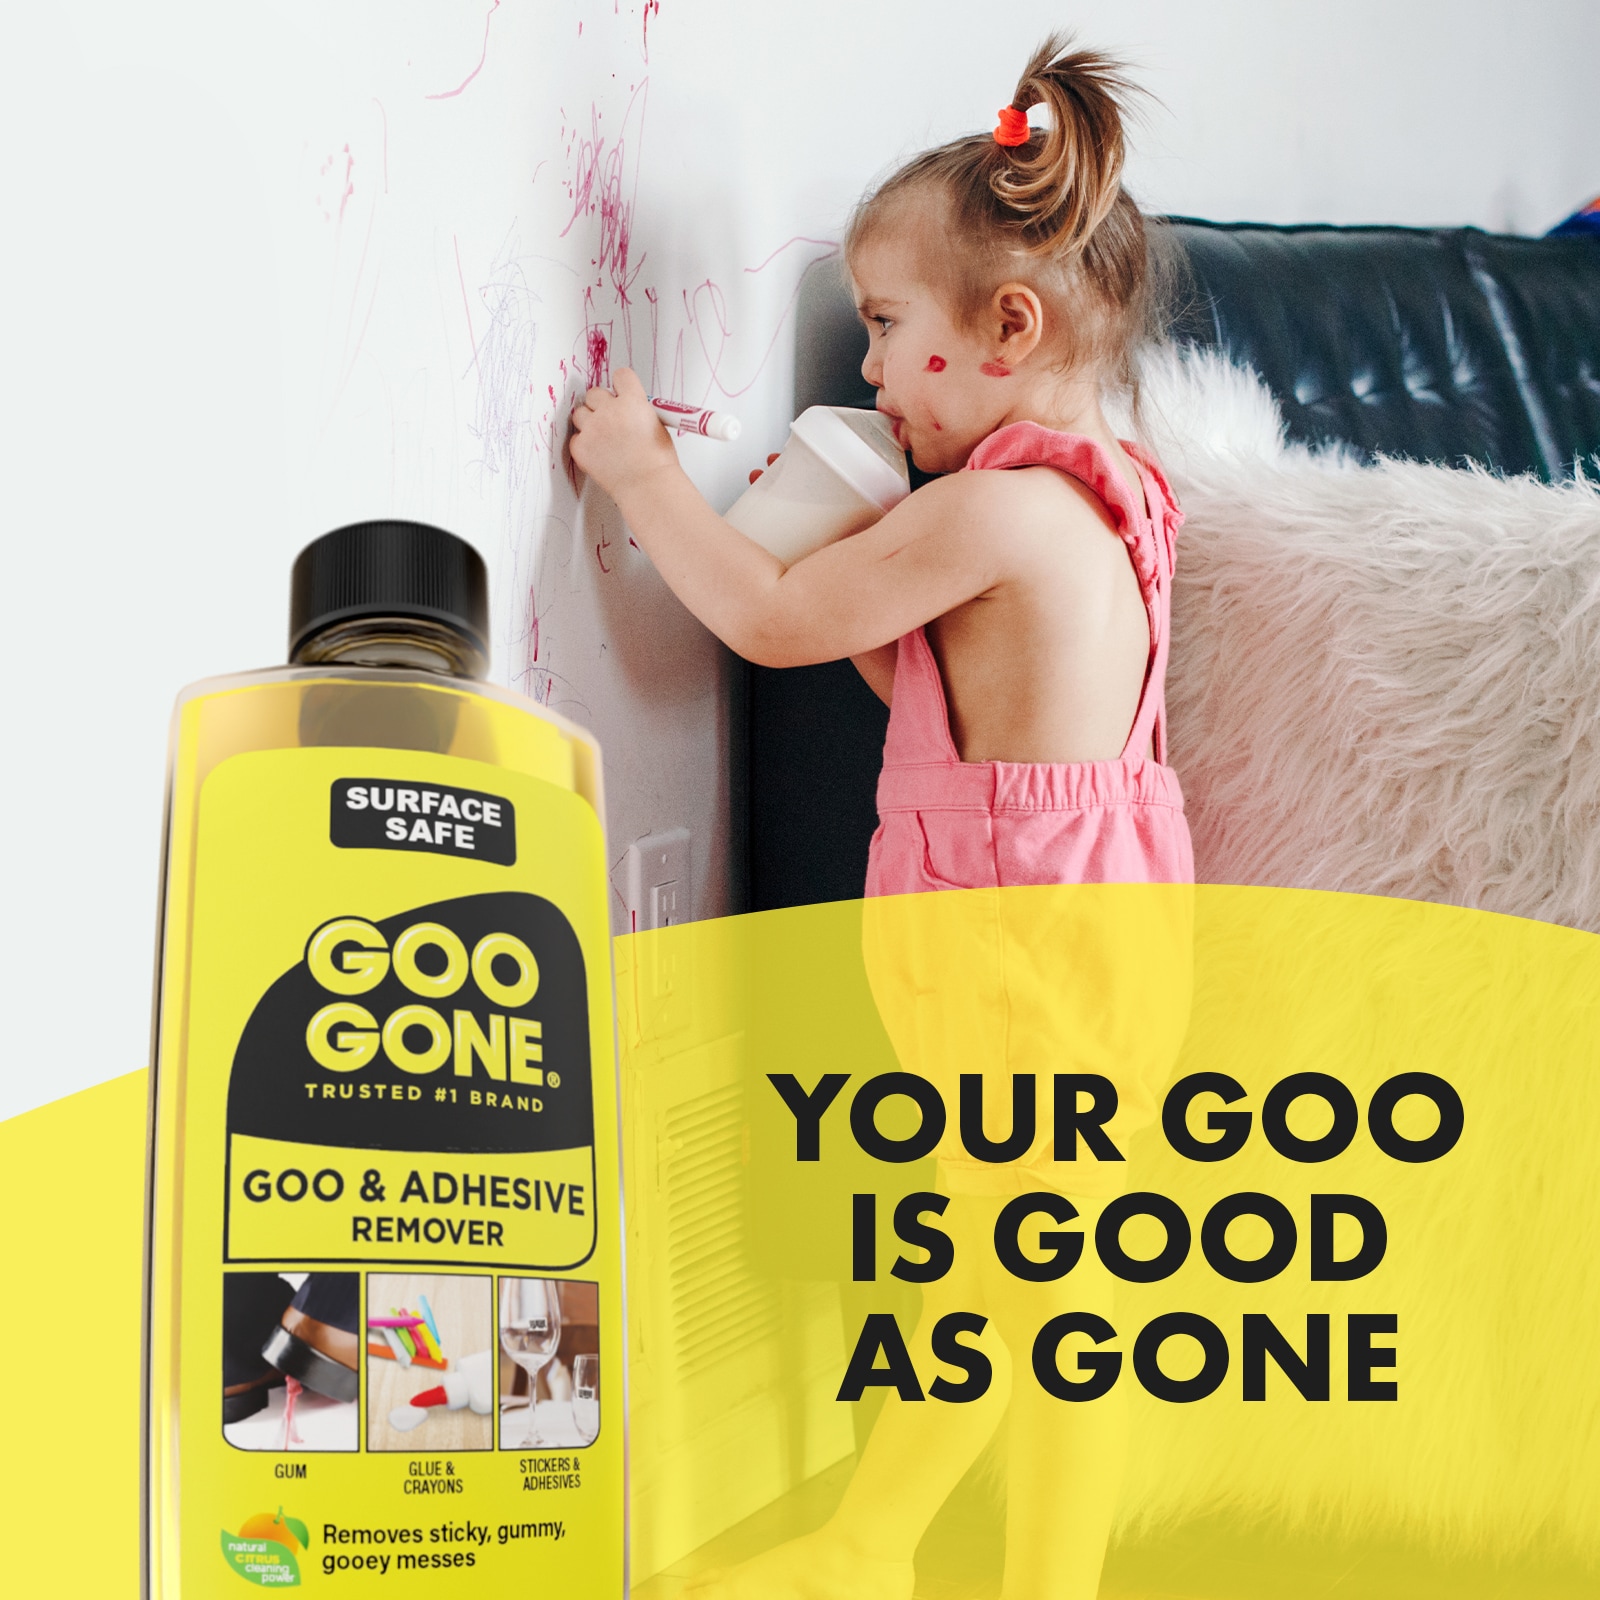 Live - Honest Review of Goo Gone Oven & Grill Cleaner